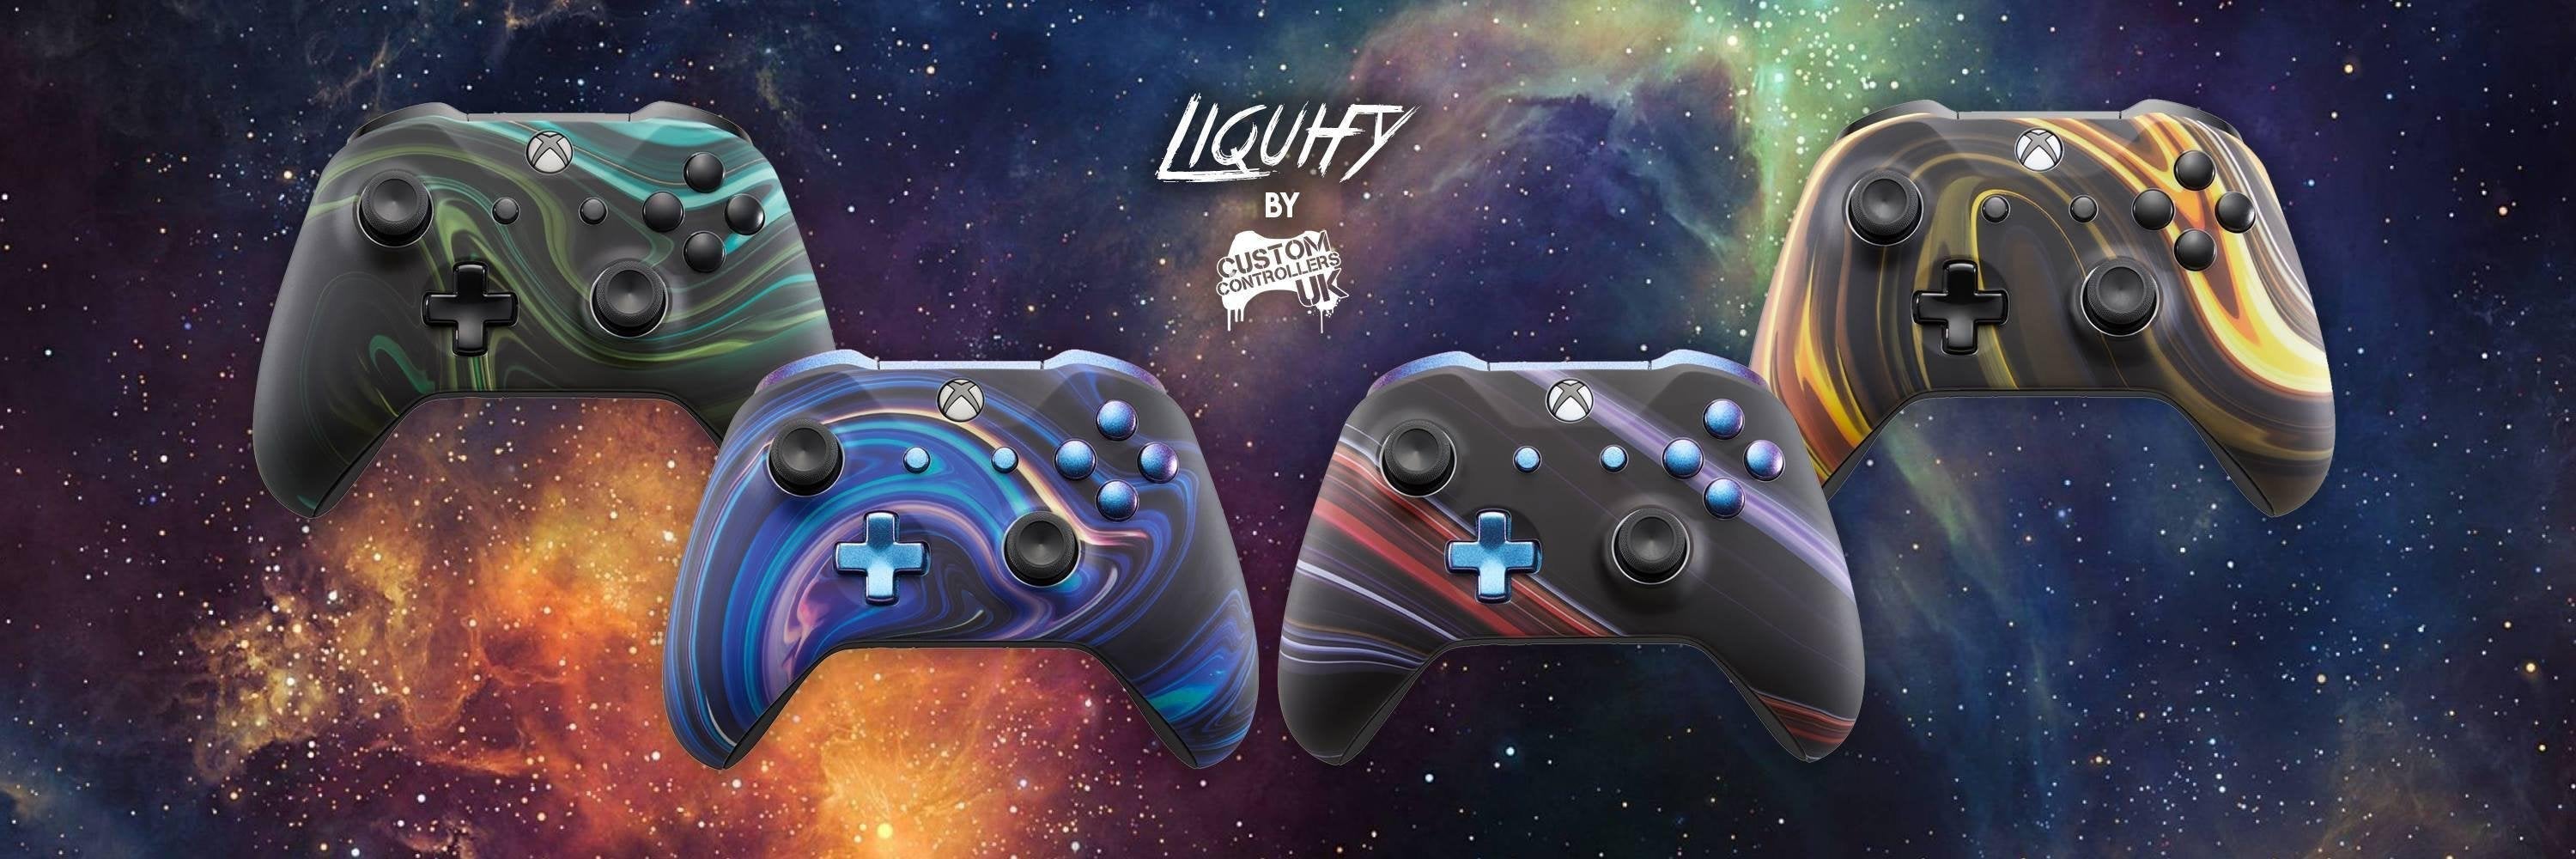 Liquify Edition Xbox One Controllers-Custom Controllers UK